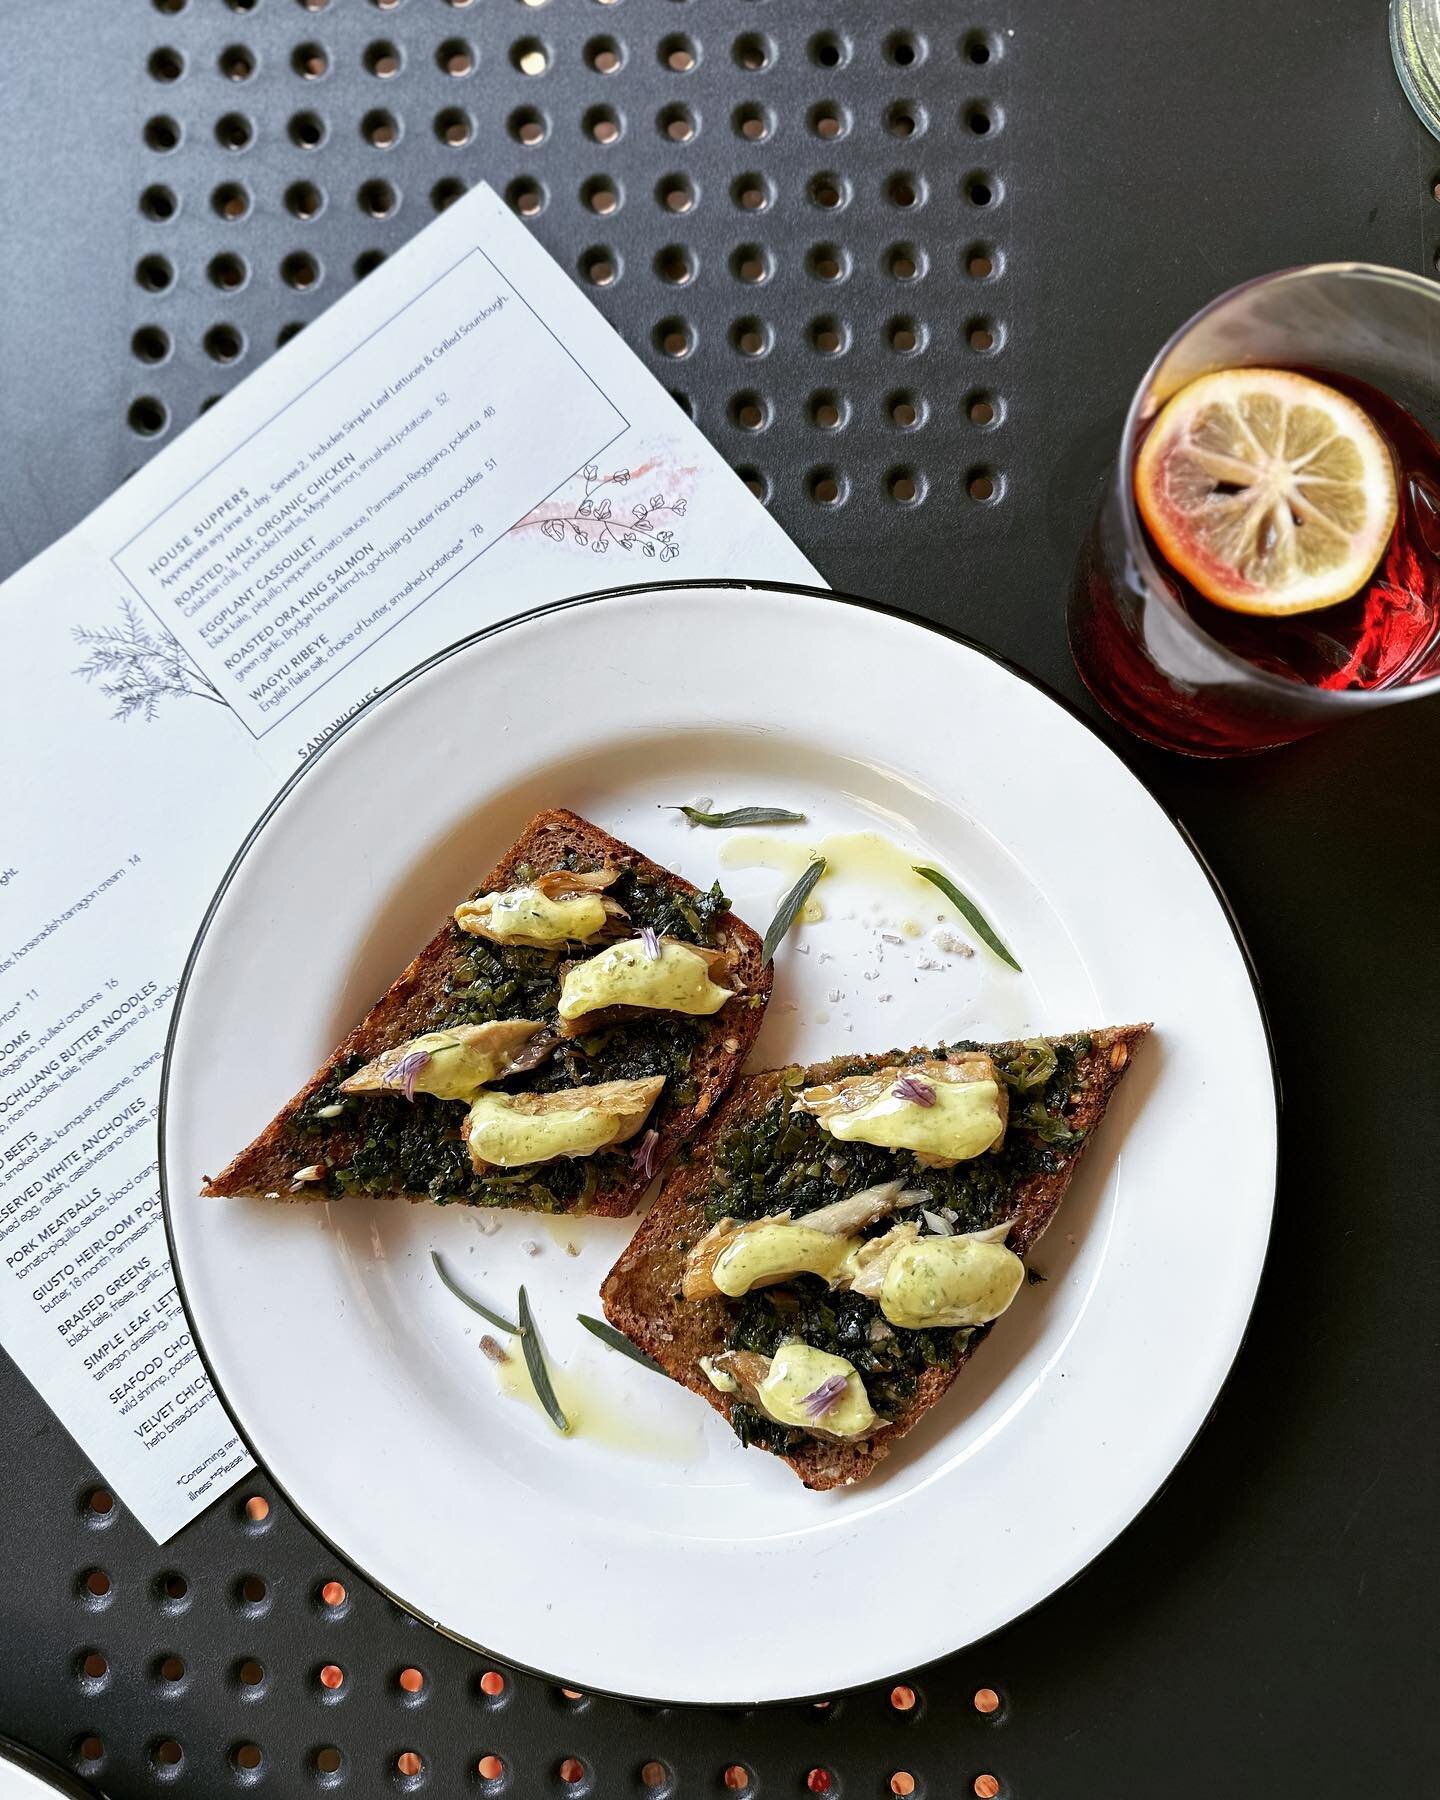 Holy mackerel (on toast!!) 🐟

The new menu items for summer dropped and we are having a 💕love affair💕 with this responsibly sourced mackerel from @patagoniaprovisions, bread from @bread.bike and chive blossoms from Chef&rsquo;s garden. ☀️

#cambri